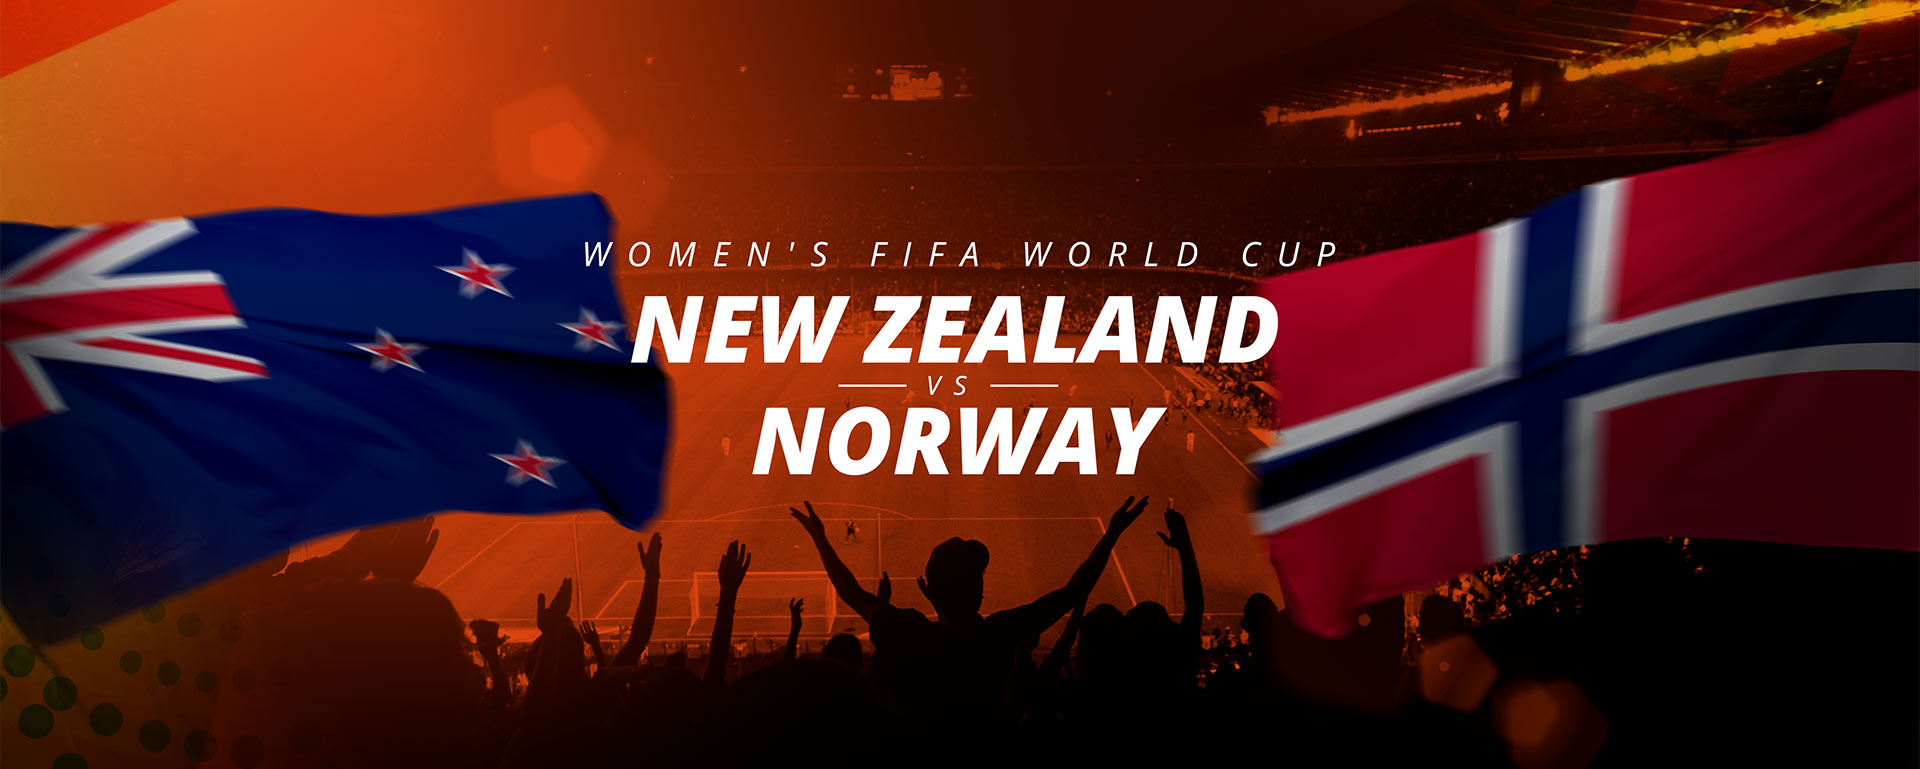 WOMEN’S WORLD CUP: NEW ZEALAND V NORWAY